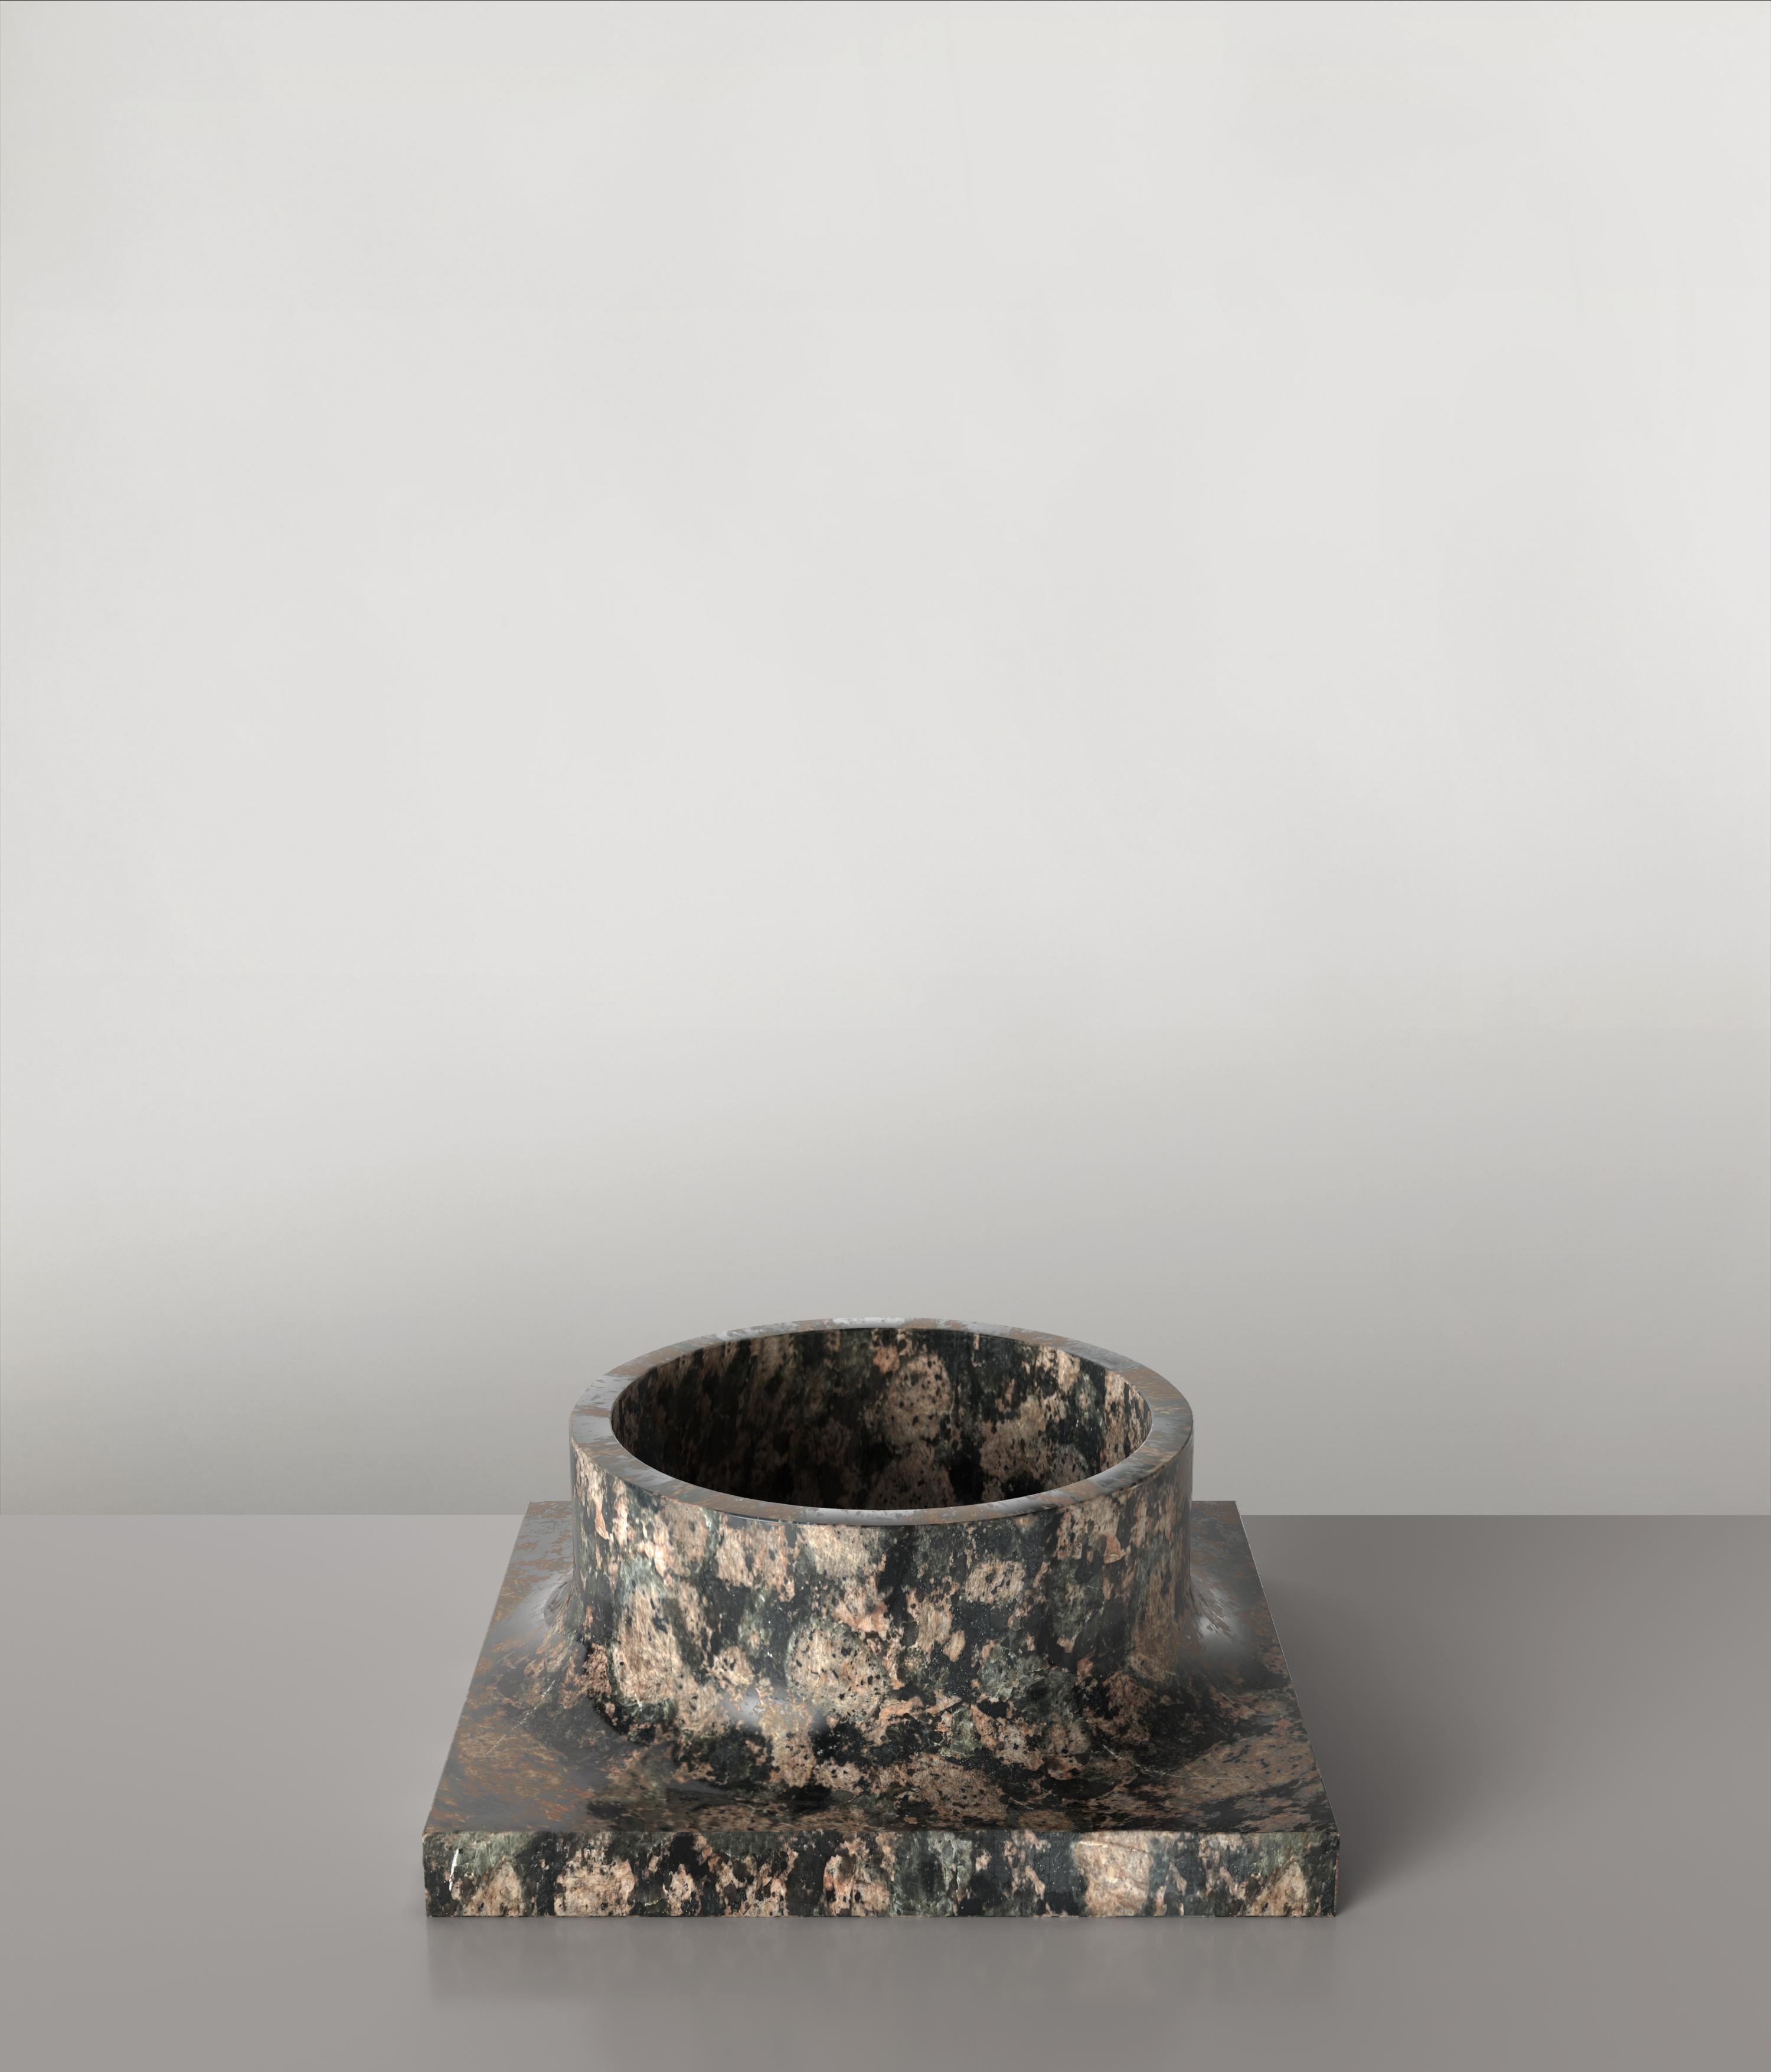 Palazzo V1 is a 21st Century sculptural vase made by Italian artisans in granite stone. It is part of the collectible design language Palazzo that has been developed by the Edizione Limitata's art research team in Milan. The small monument to the